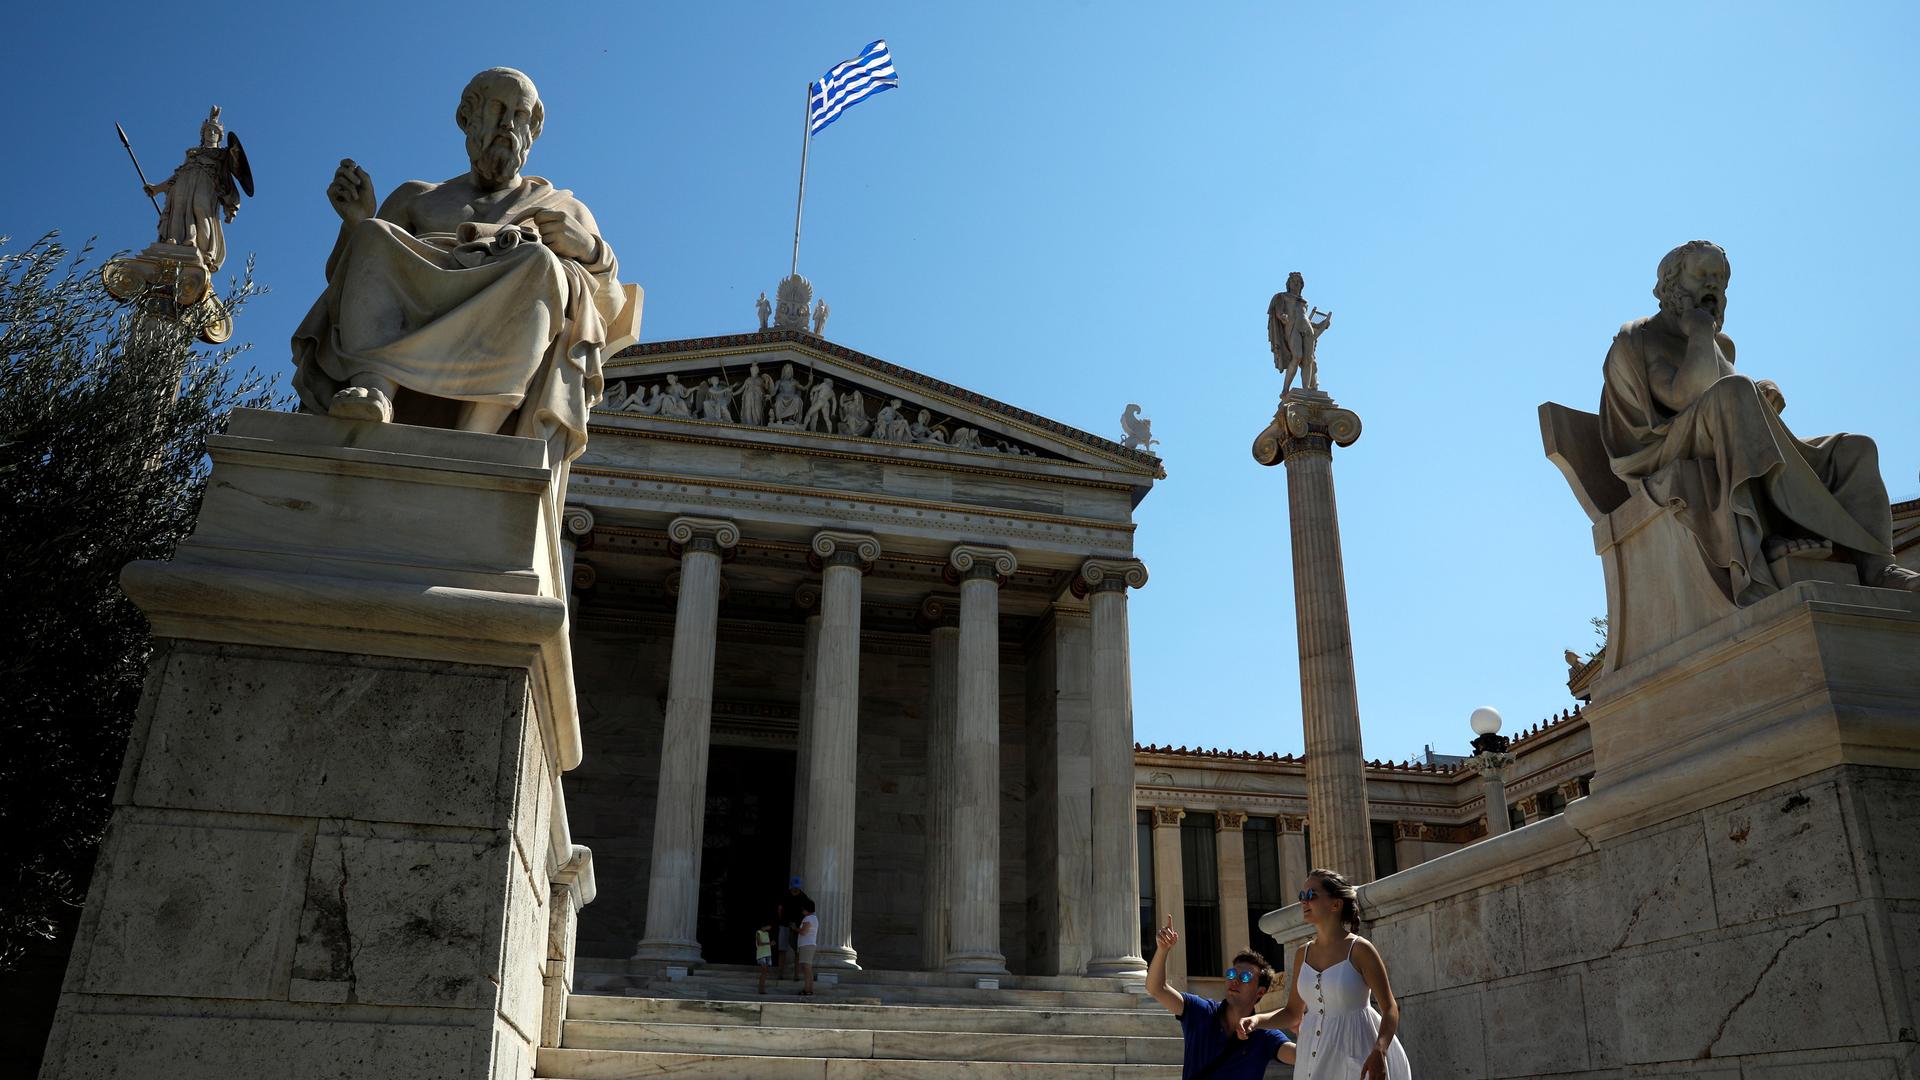 the front steps of front of the Athens Academy in Athens, Greece,